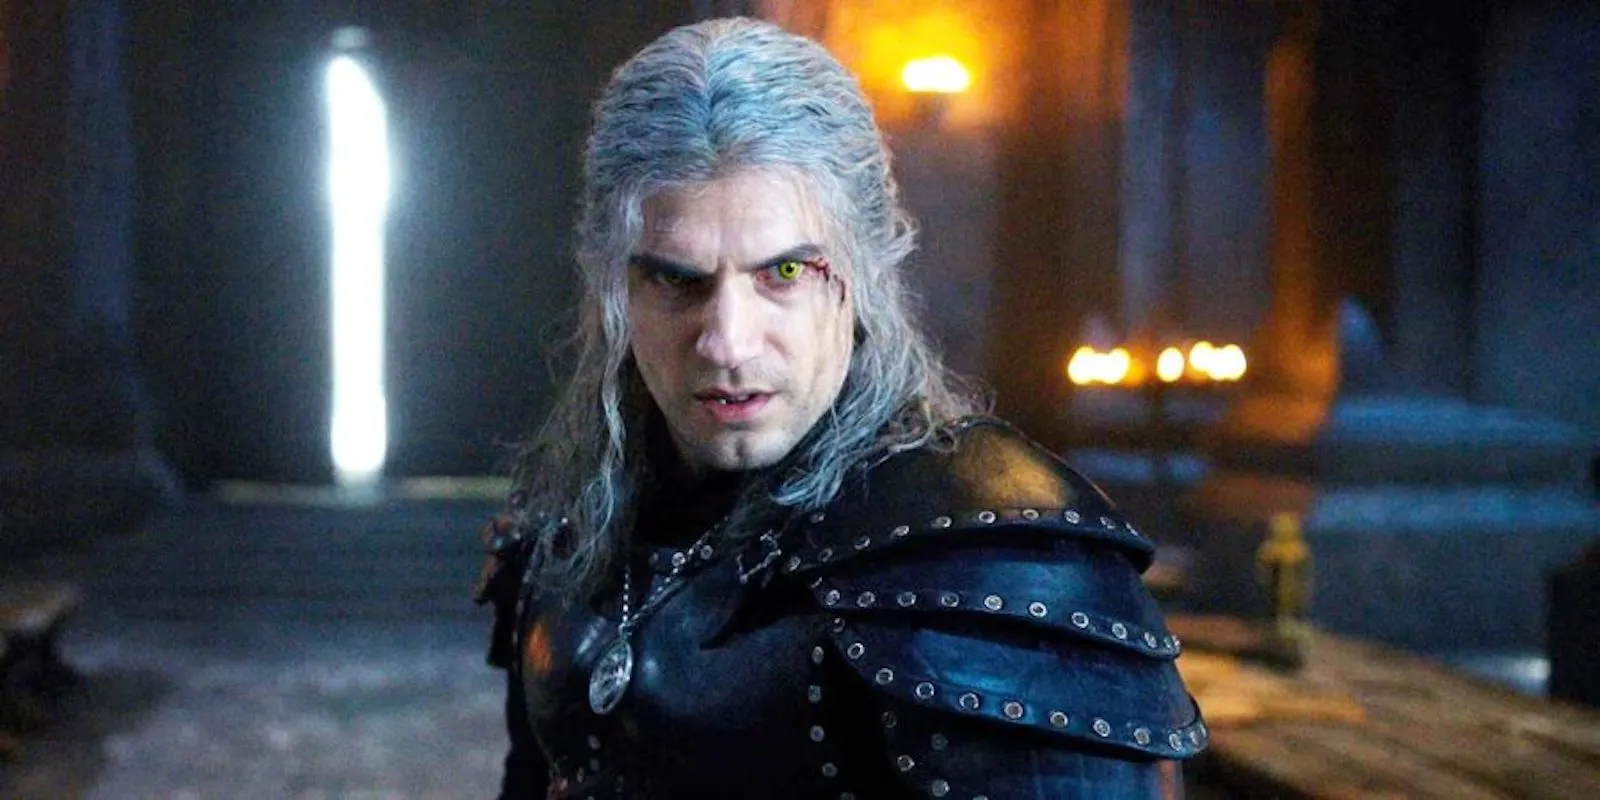 An image of Henry Cavill as Geralt of Rivia in the Witcher Netflix series.